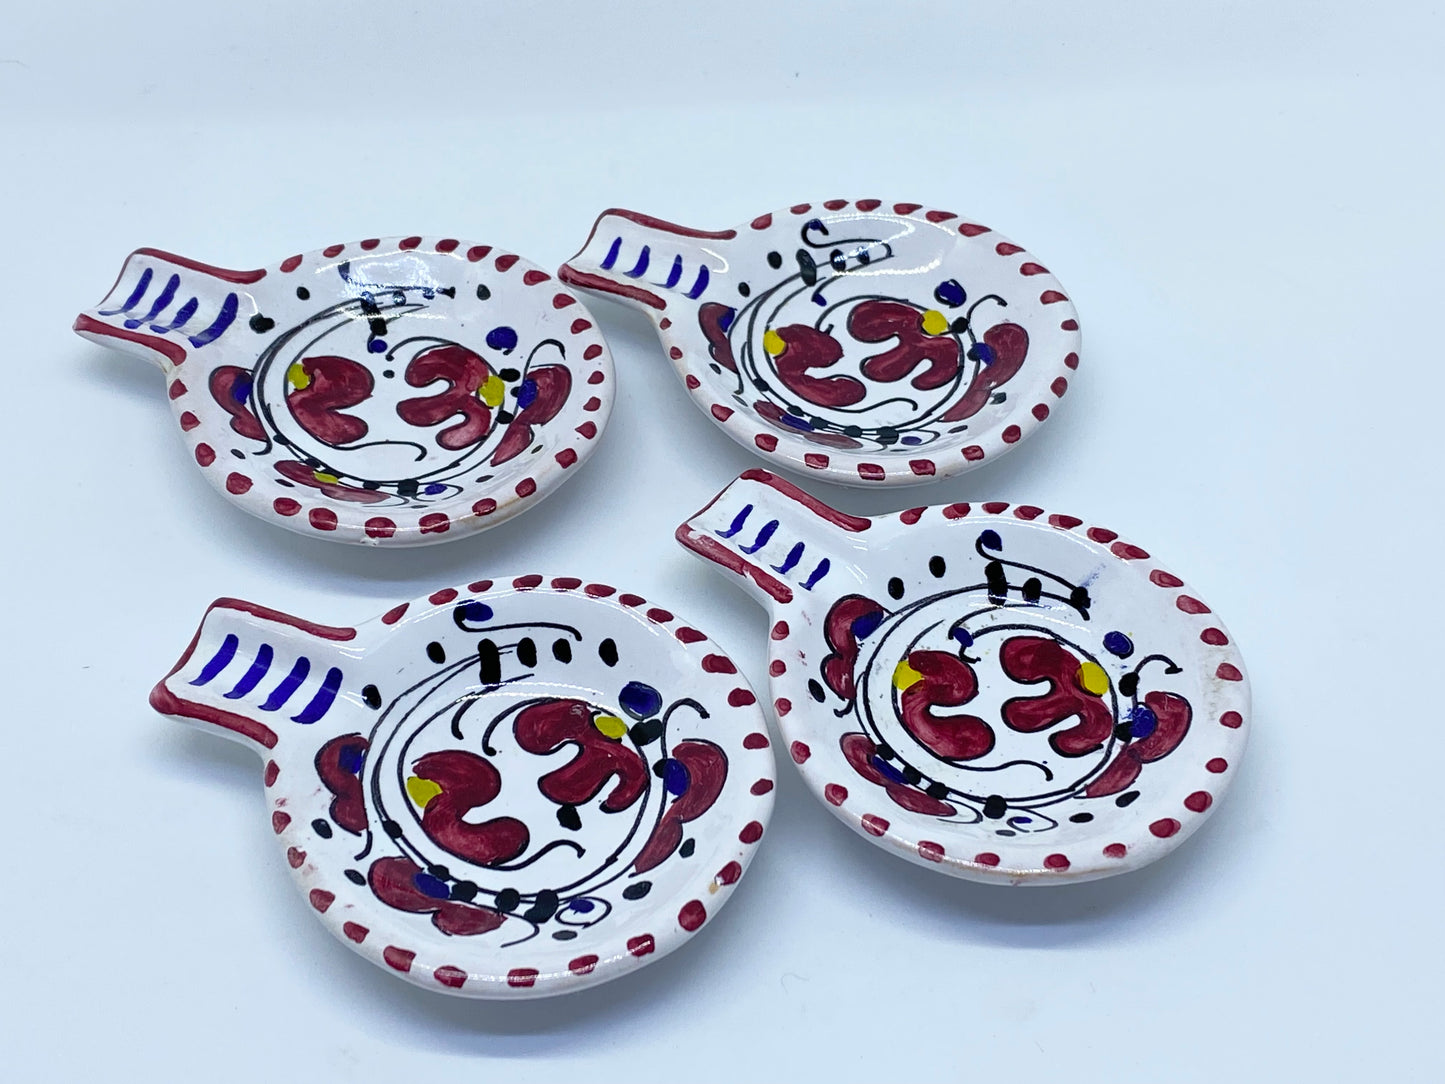 Vintage 1960s Deruta Italy Orvieto Red Rooster - Ashtray set -Holder with 4 small ashtrays.